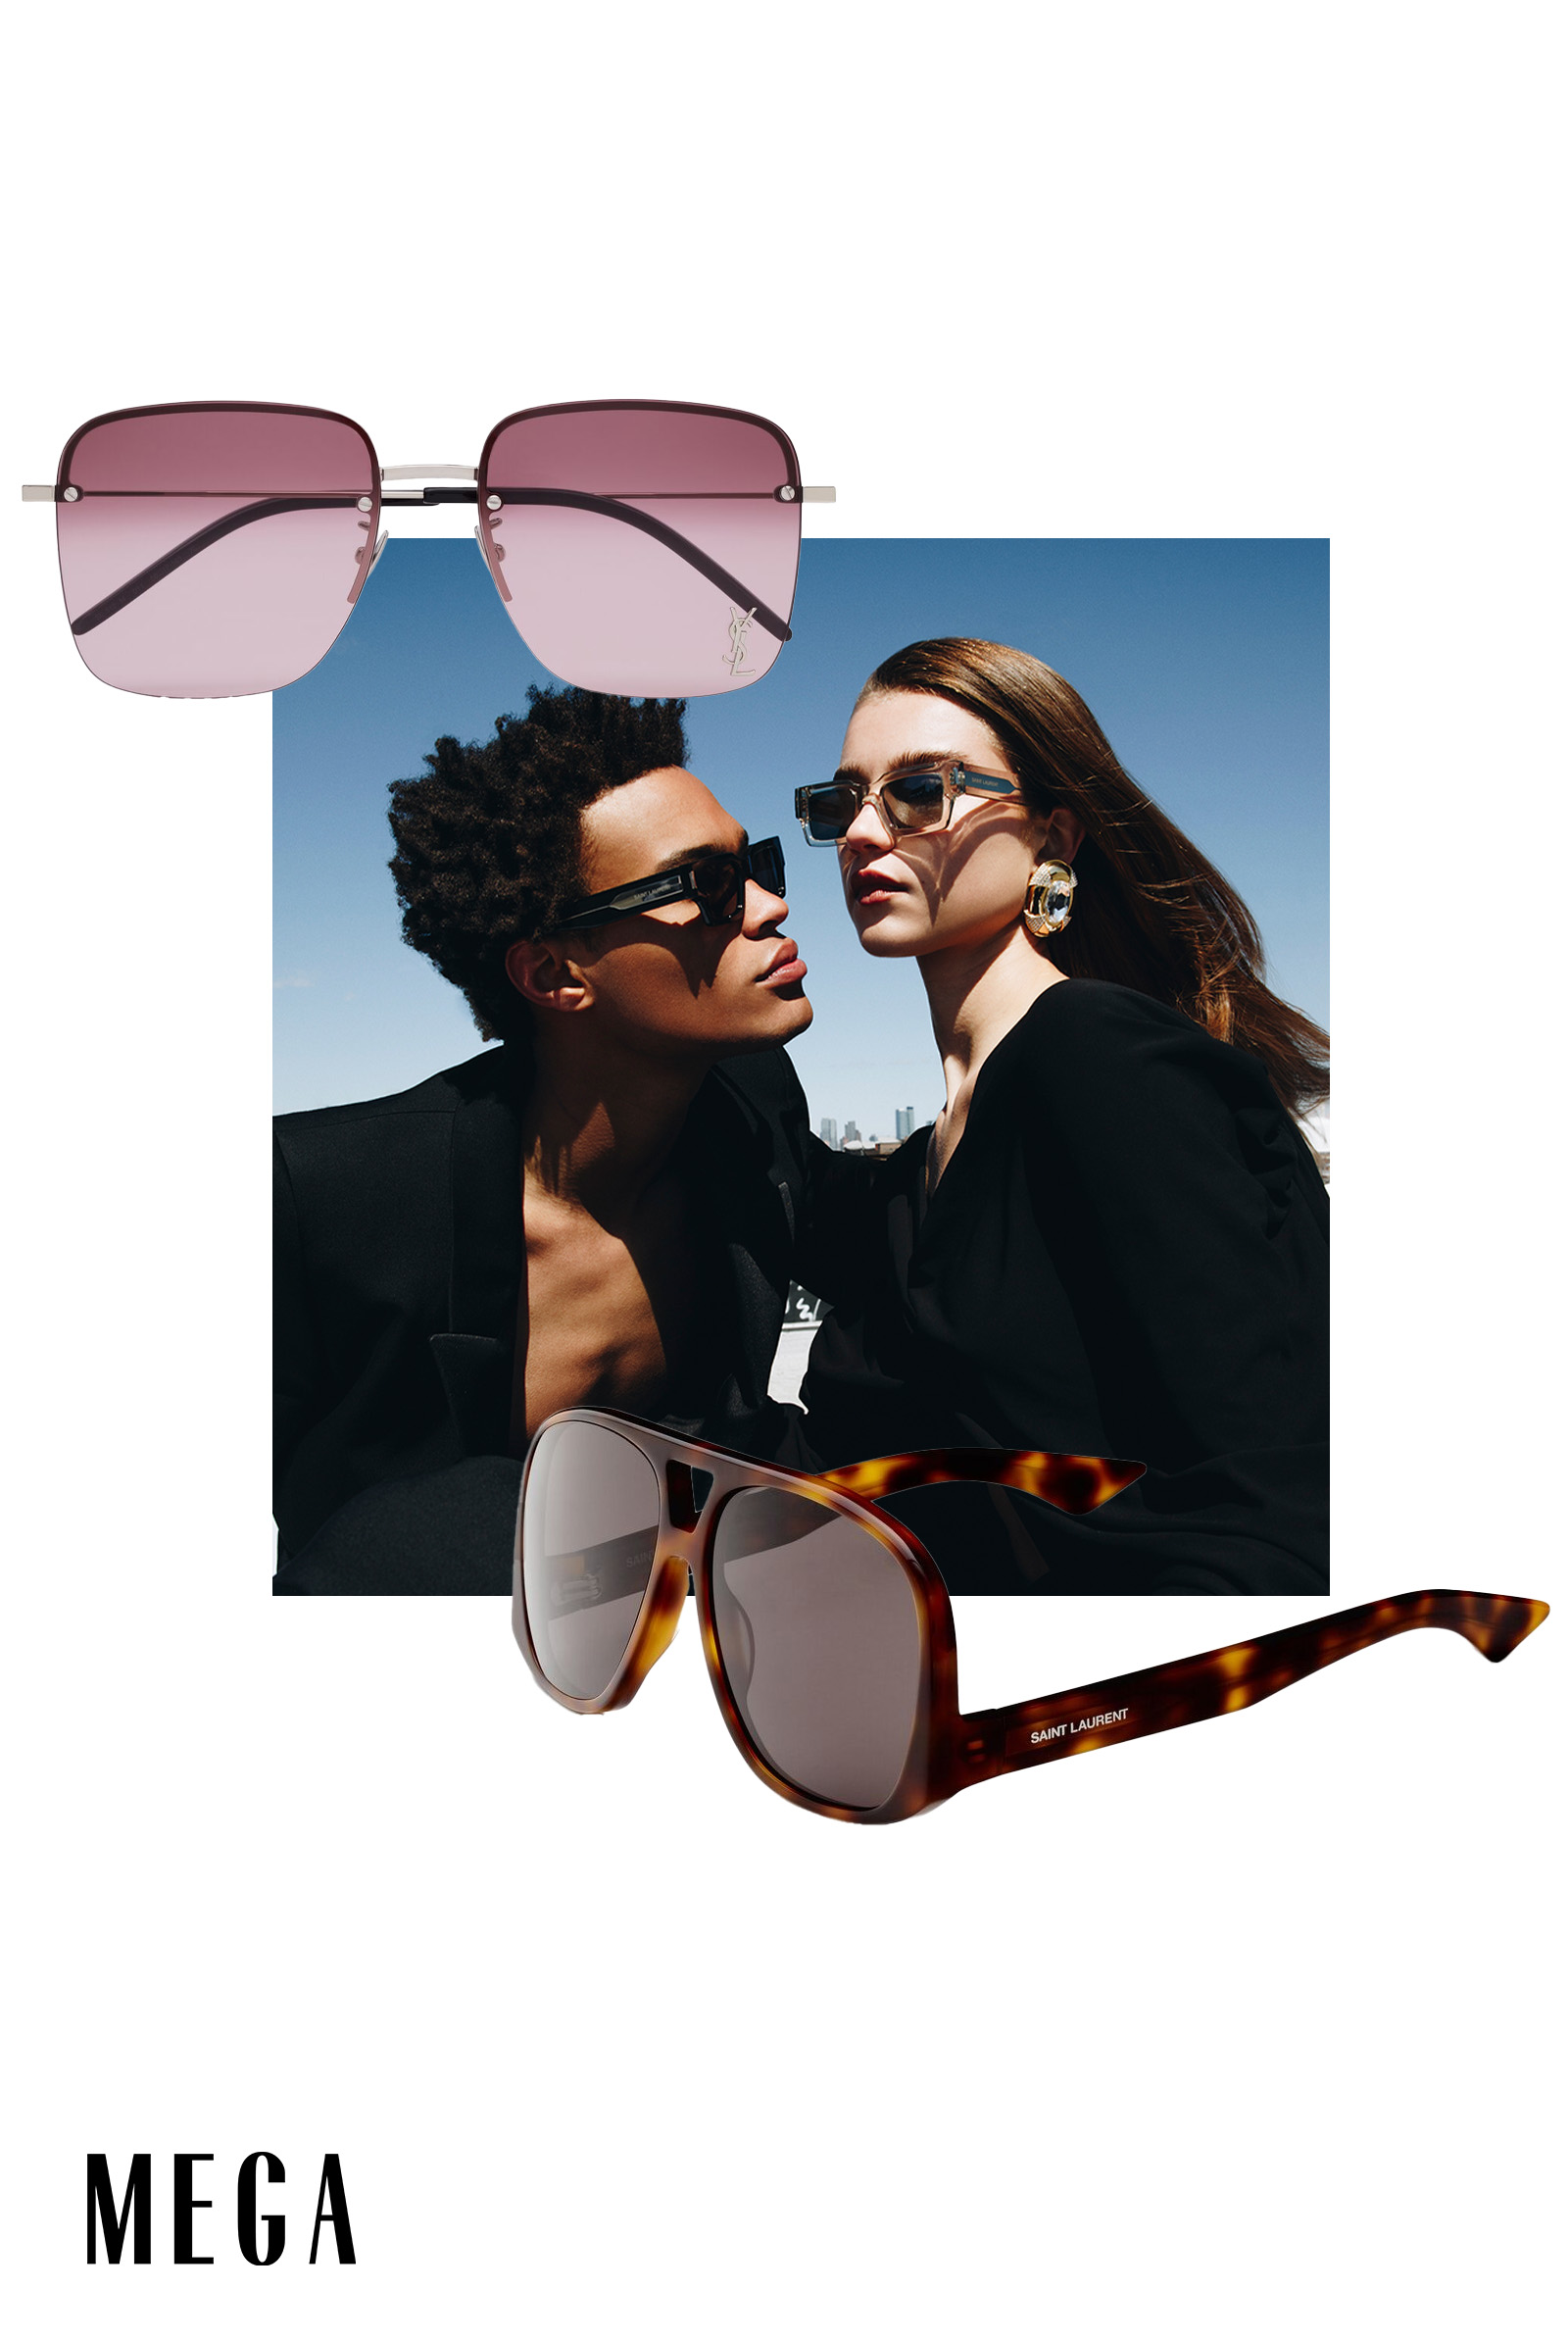 MEGA Oversized Sunglasses are Back and Better This Summer